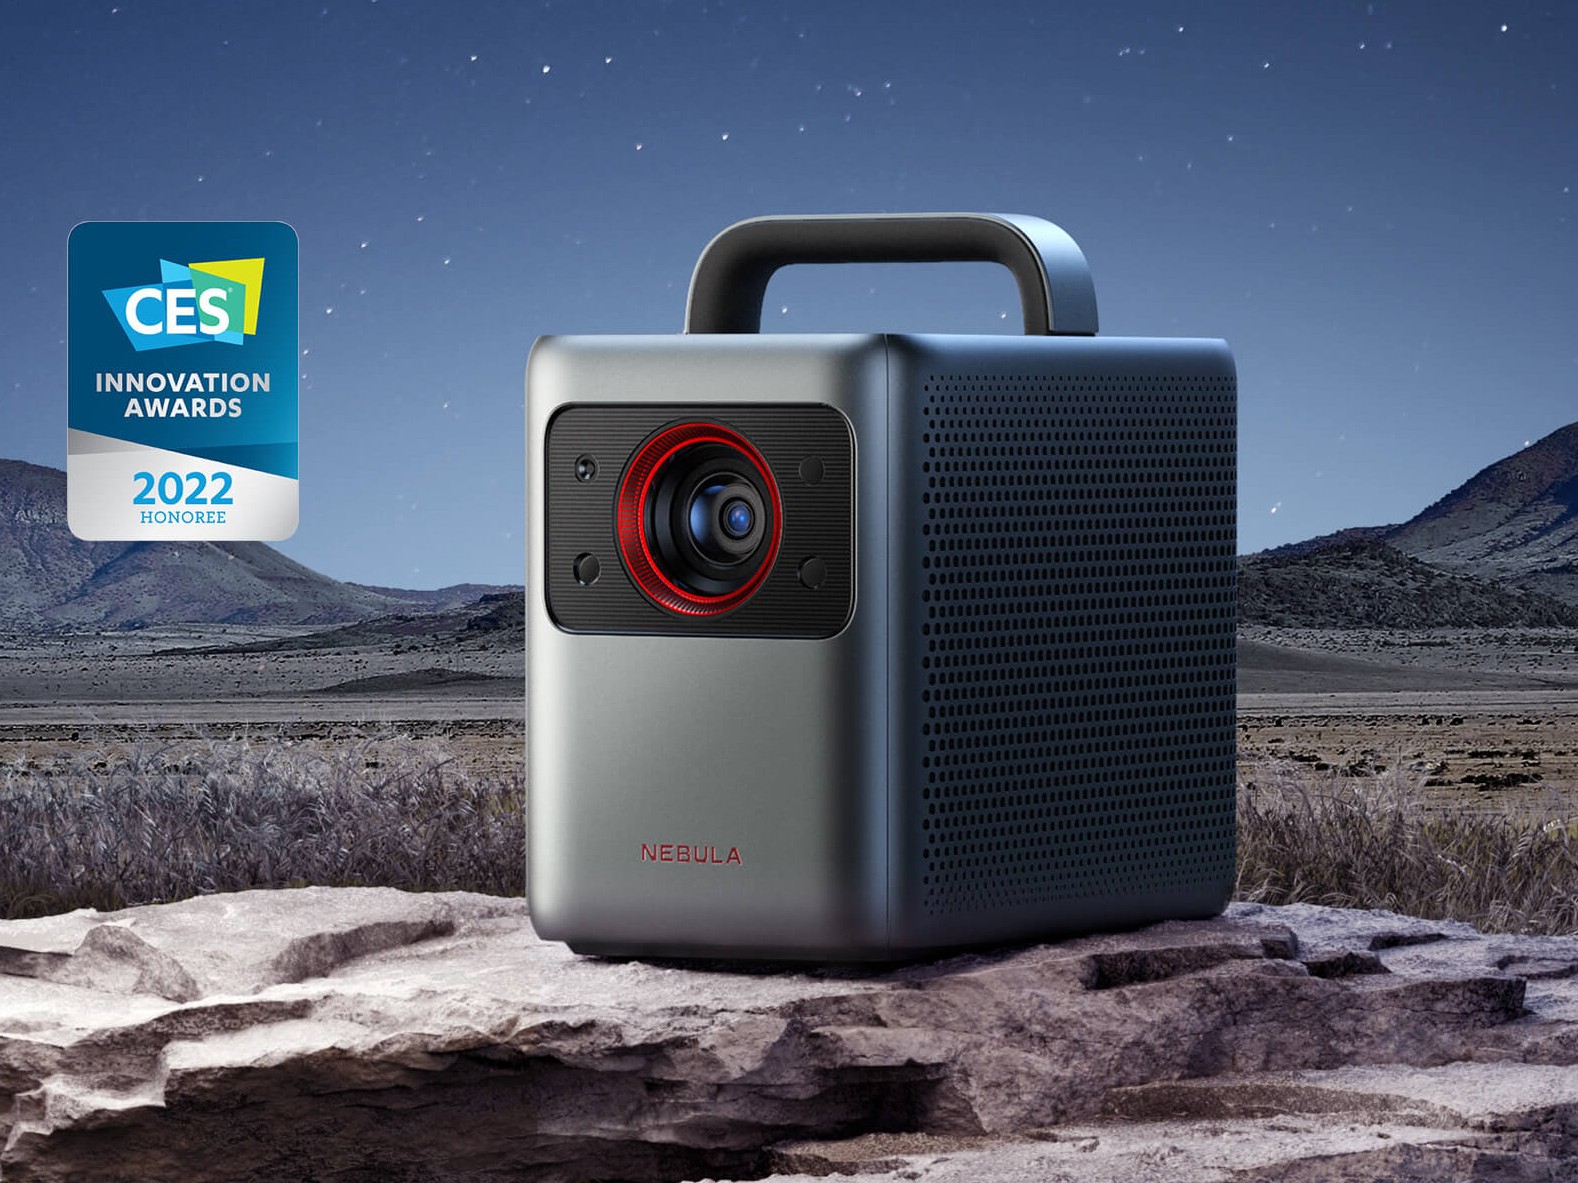 Anker Nebula Cosmos 1080p Laser Projector now up to 33% off